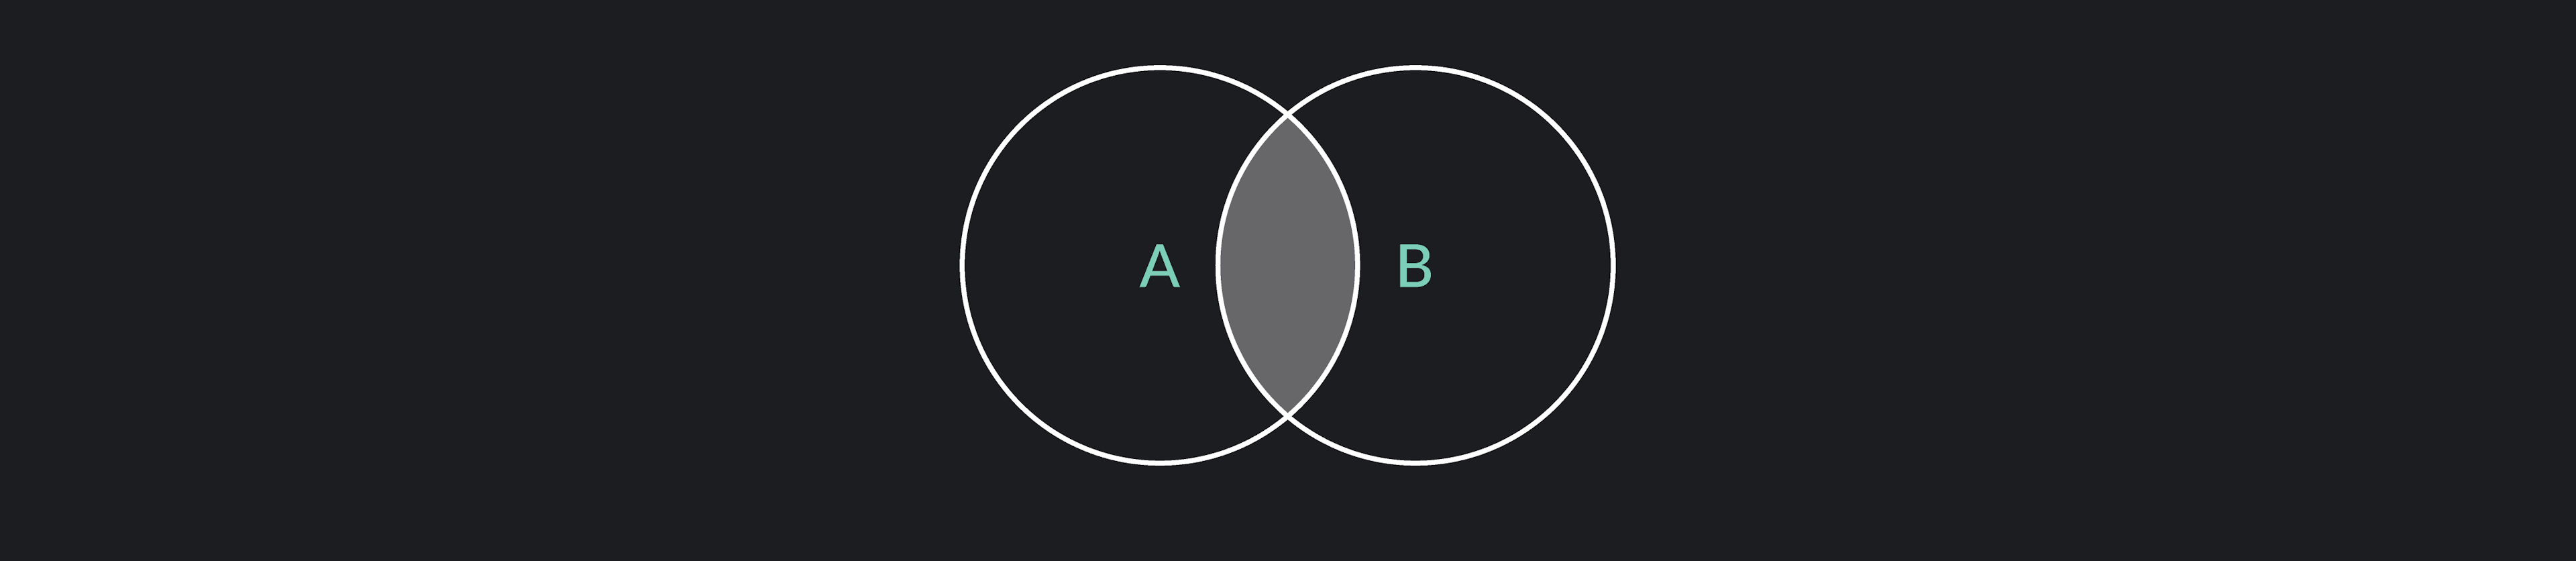 In a Venn diagram, the intersection is the part where the two sets overlap